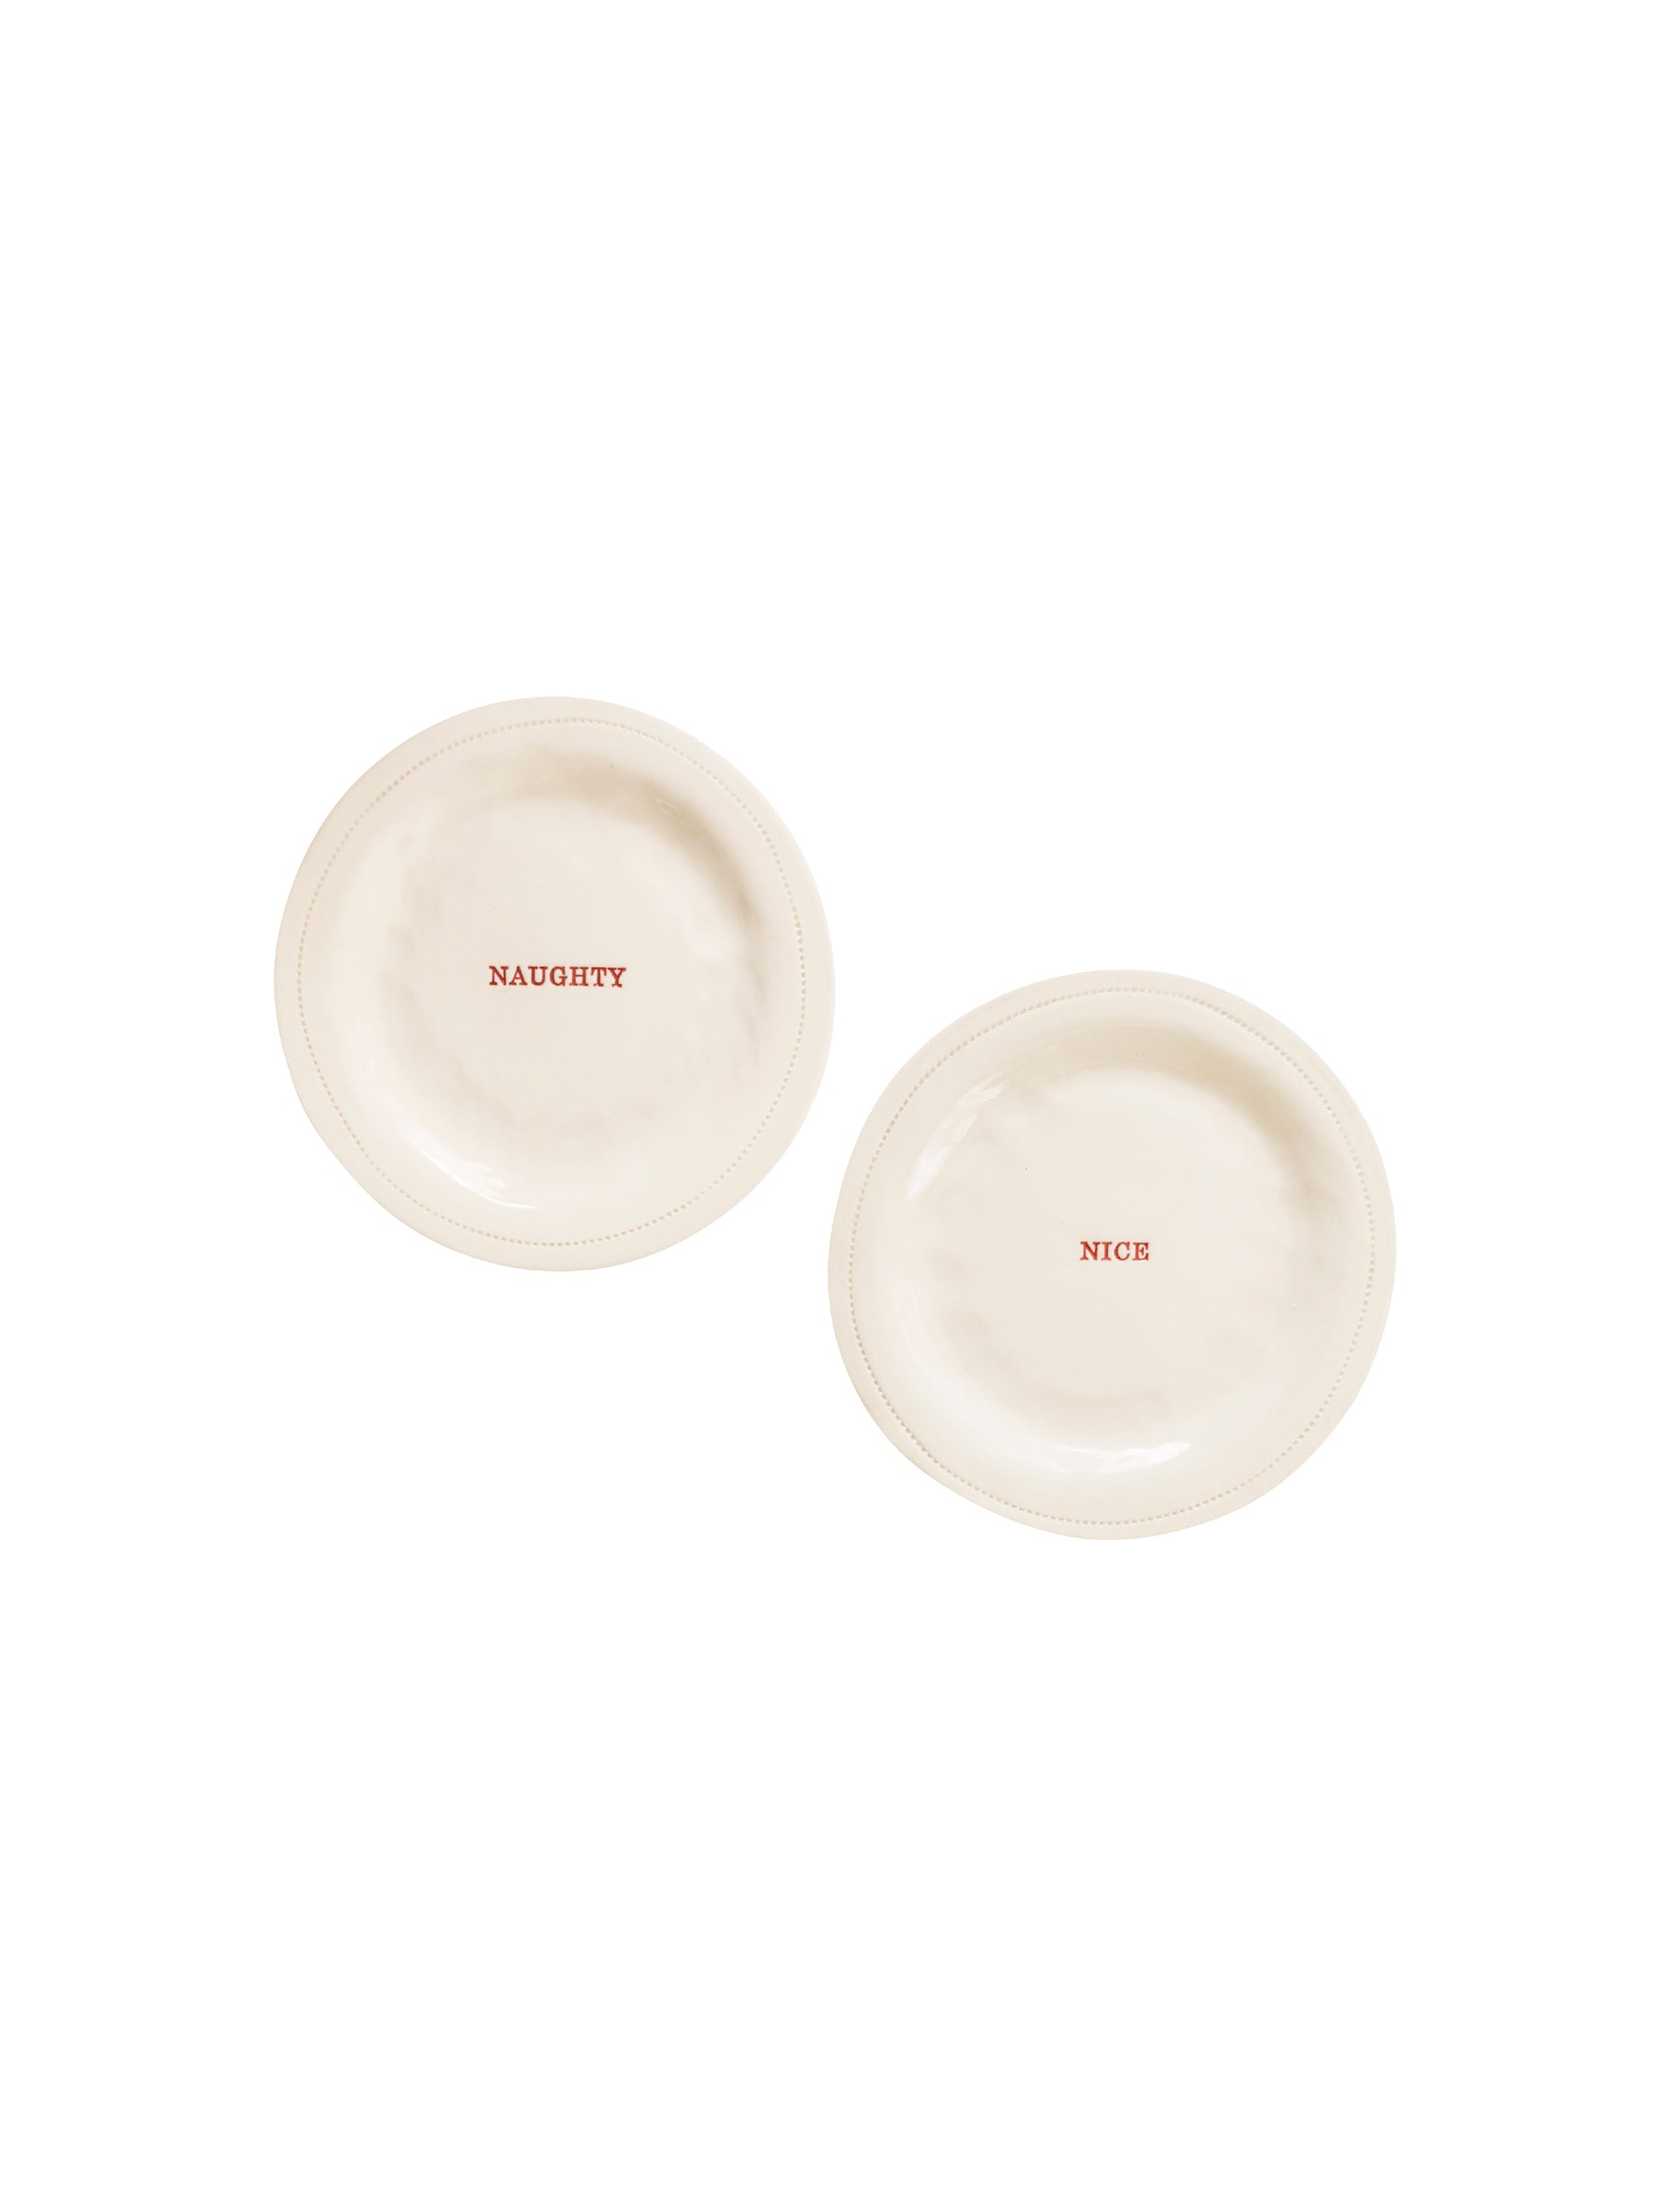 WT Holiday Canapé Plates Naughty Nice Red Weston Table